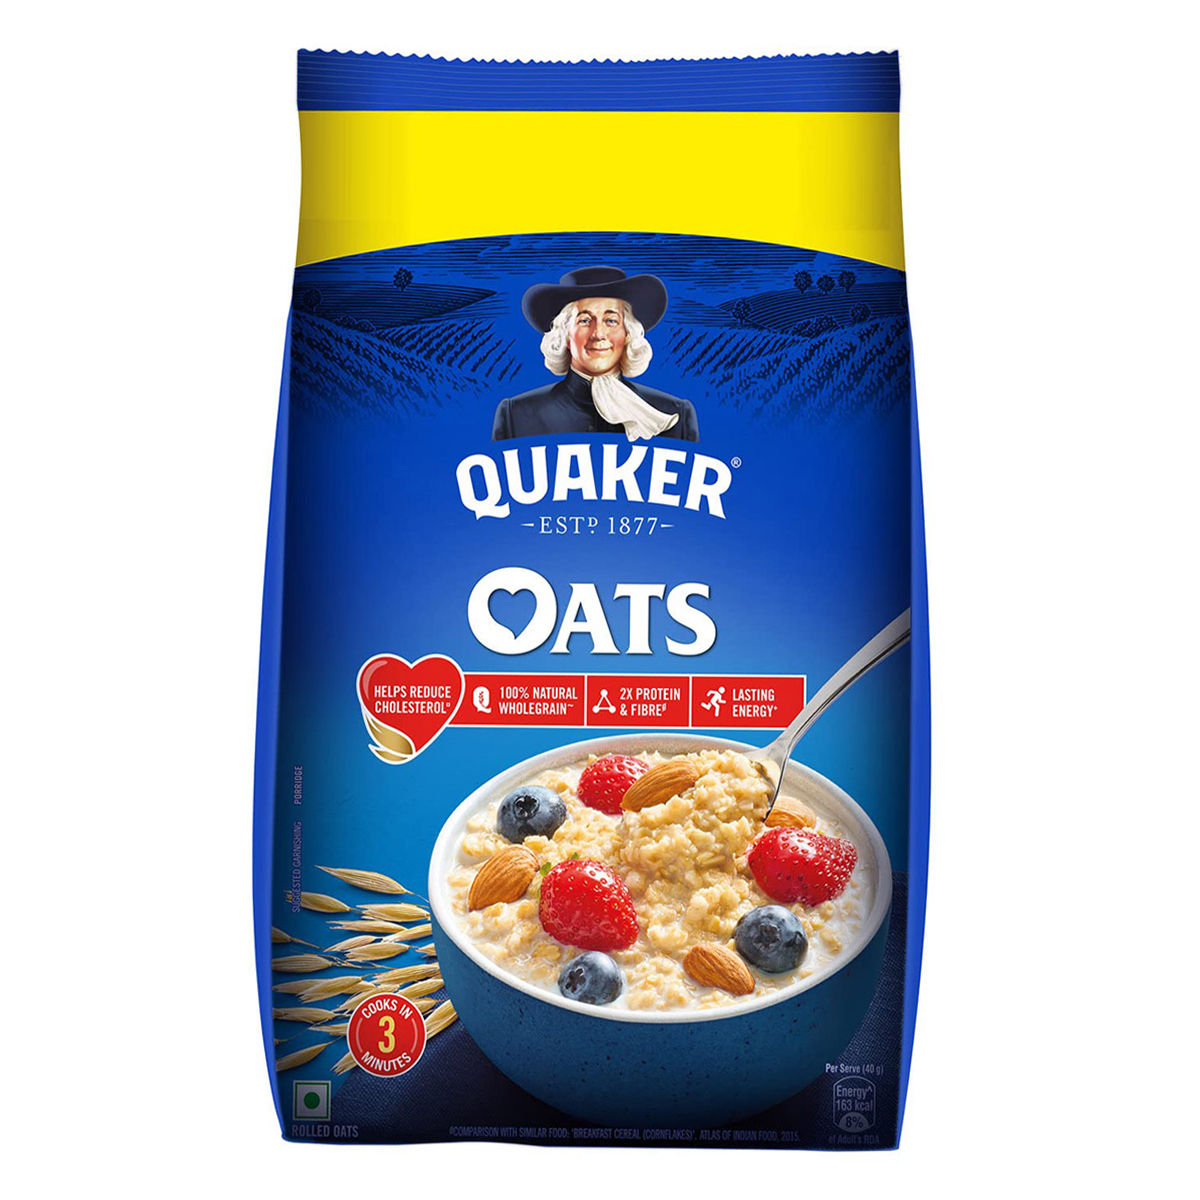 Quaker Oats, 1 kg Refill Pack | Uses, Benefits, Price | Apollo Pharmacy